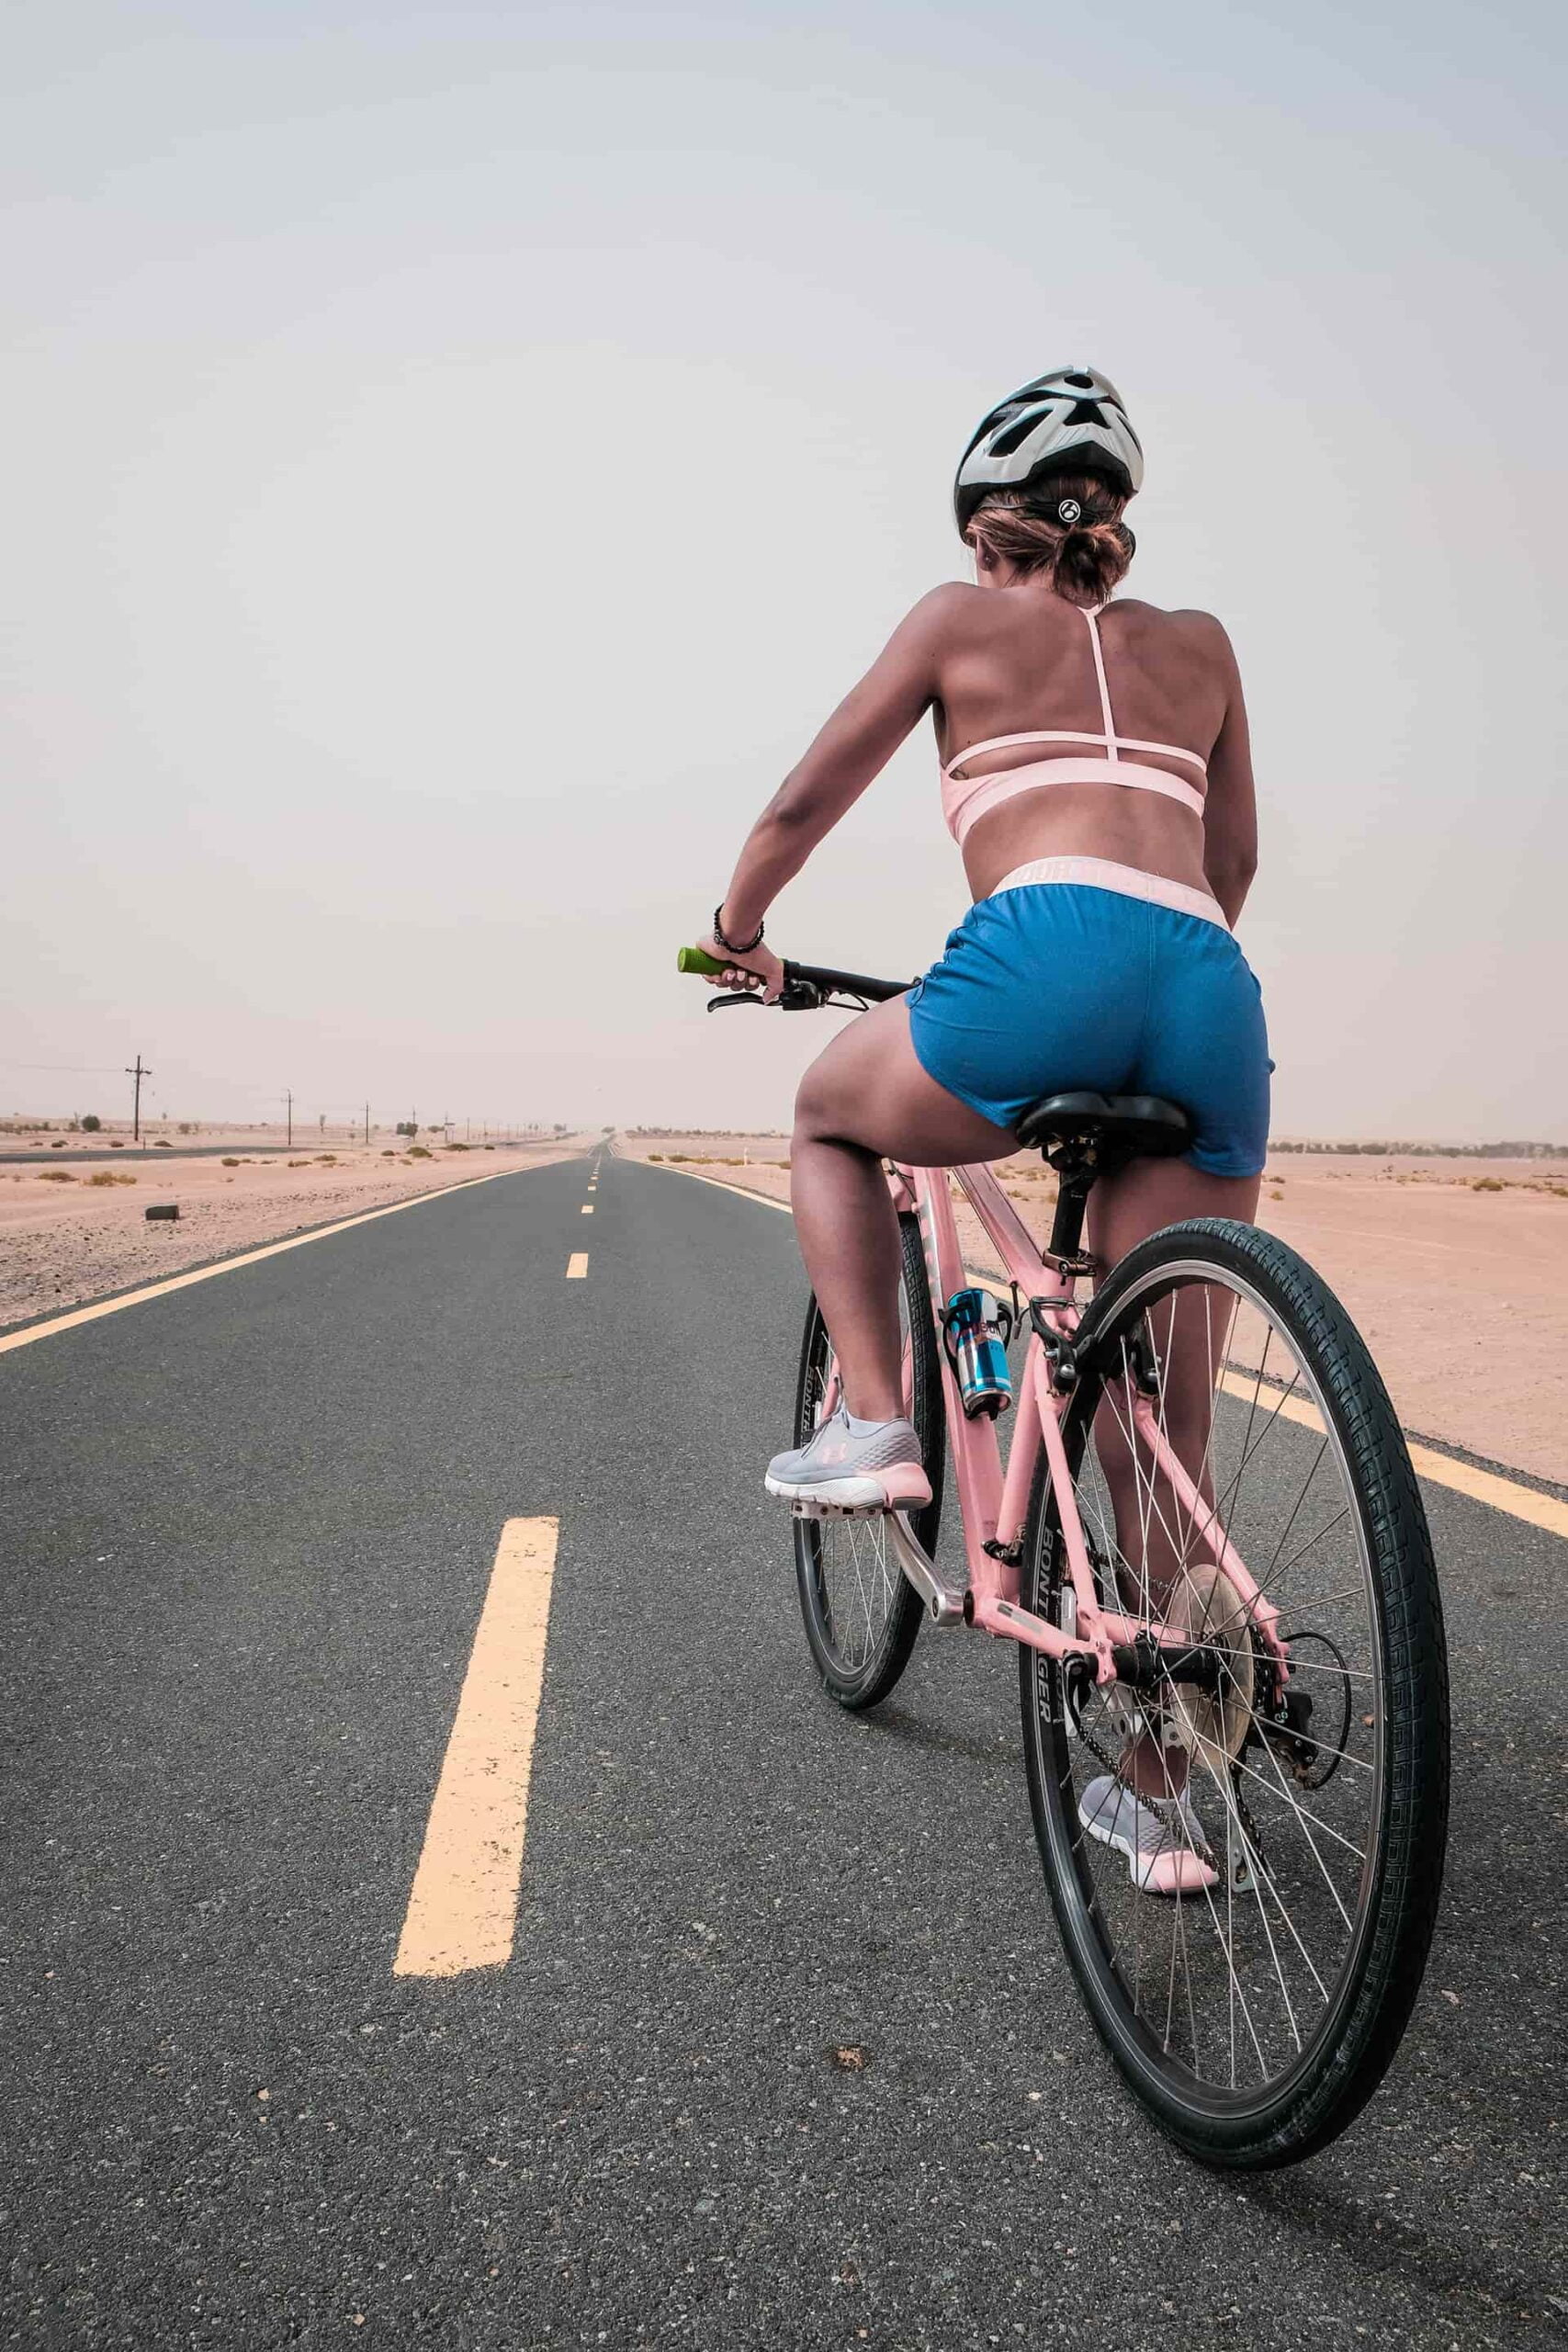 Biking doesn't really make your butt bigger or smaller but it can help tone your buttocks